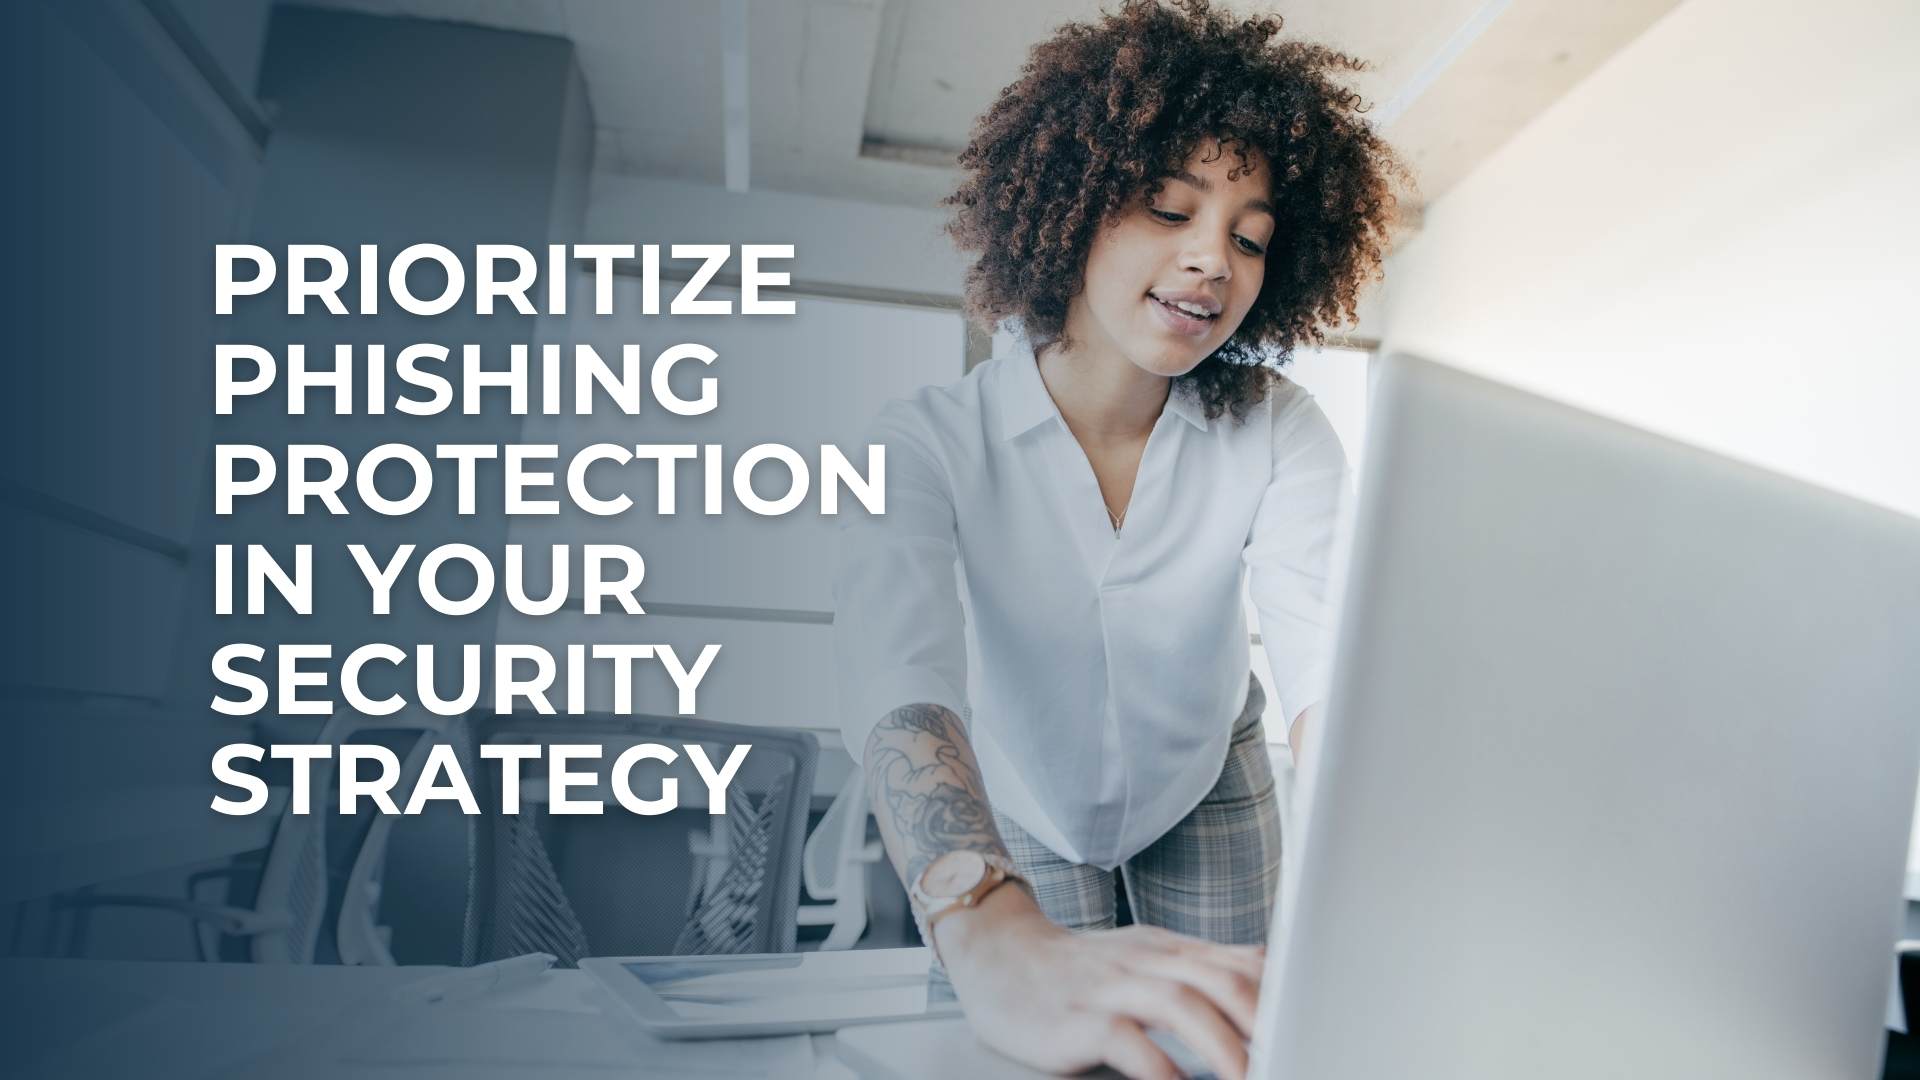 Prioritize Phishing Protection in Your Security Strategy